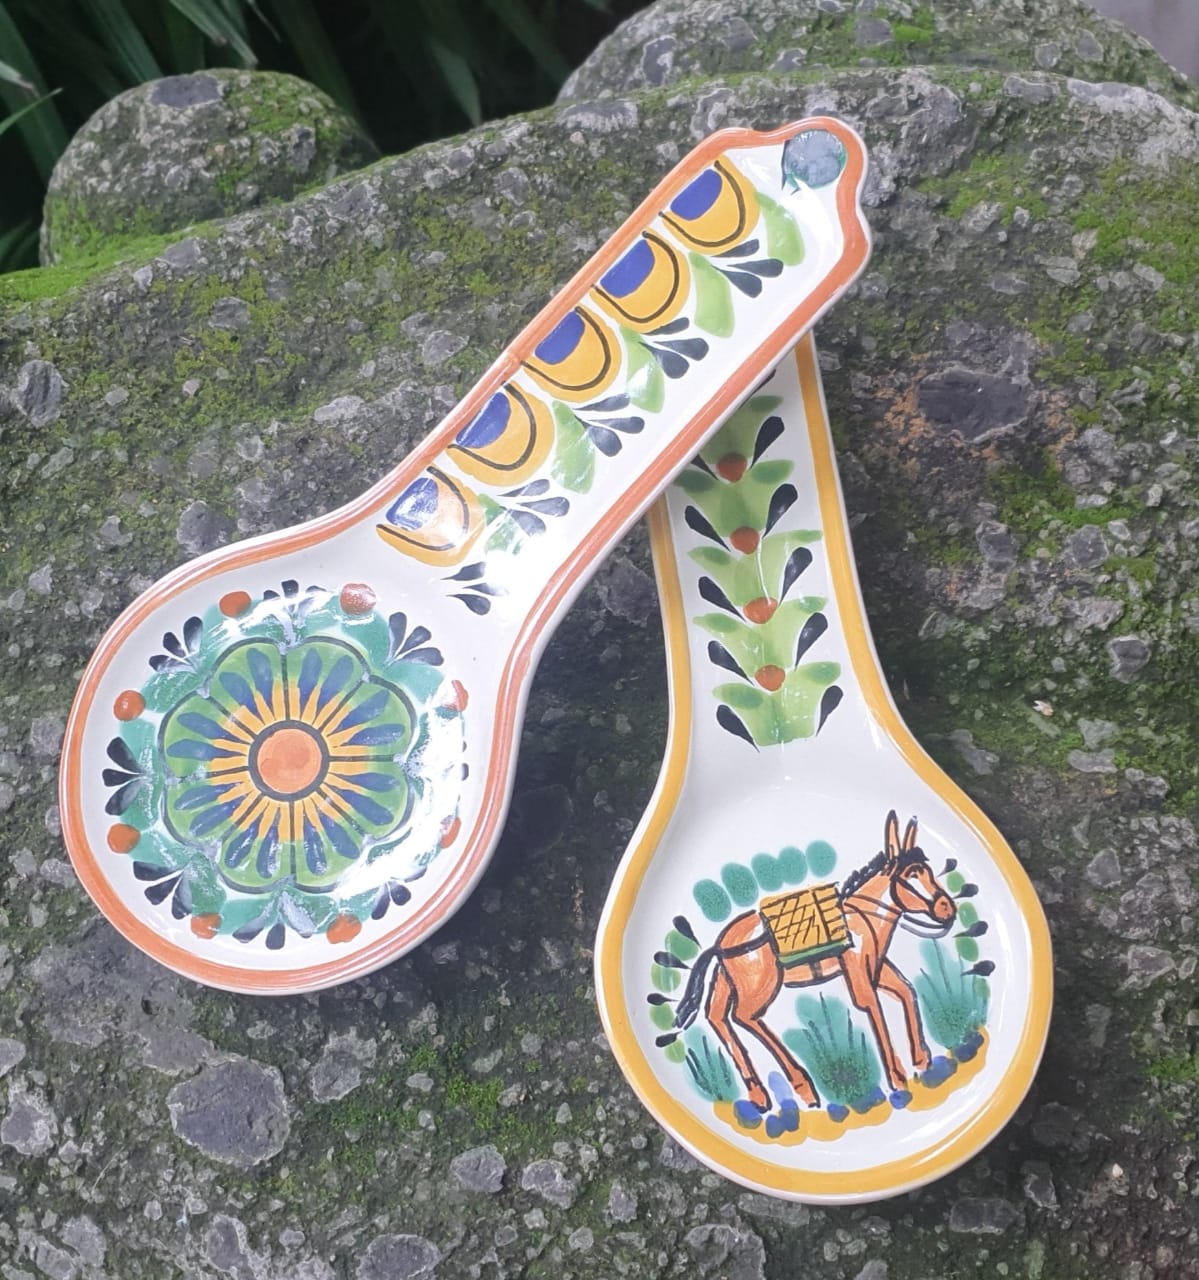 Donkey and Flower Round Spoon Rest Set 3.7*9.1